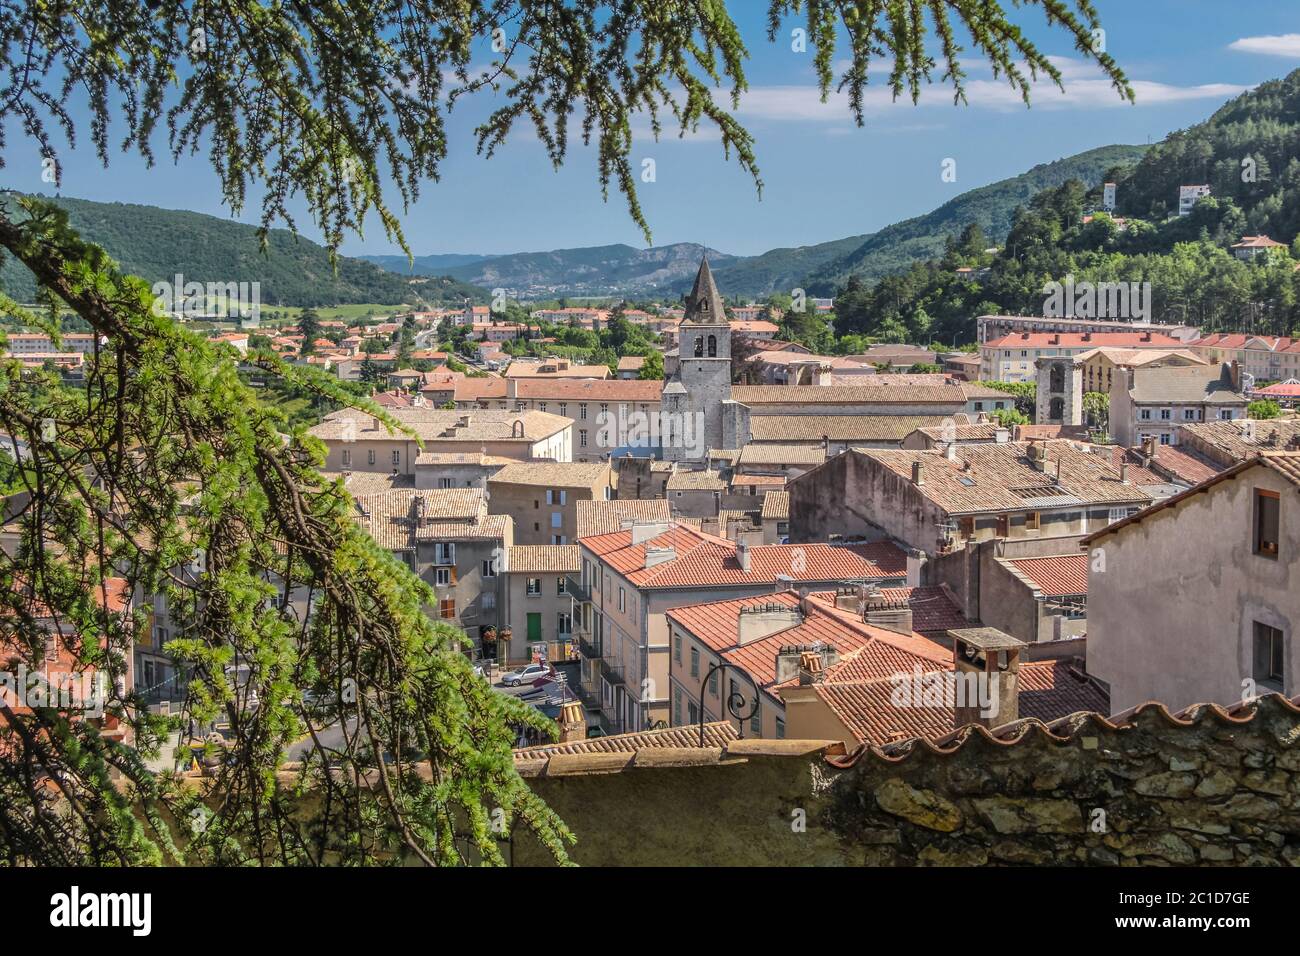 View of the old town of Sisteron, Provence, France Stock Photo